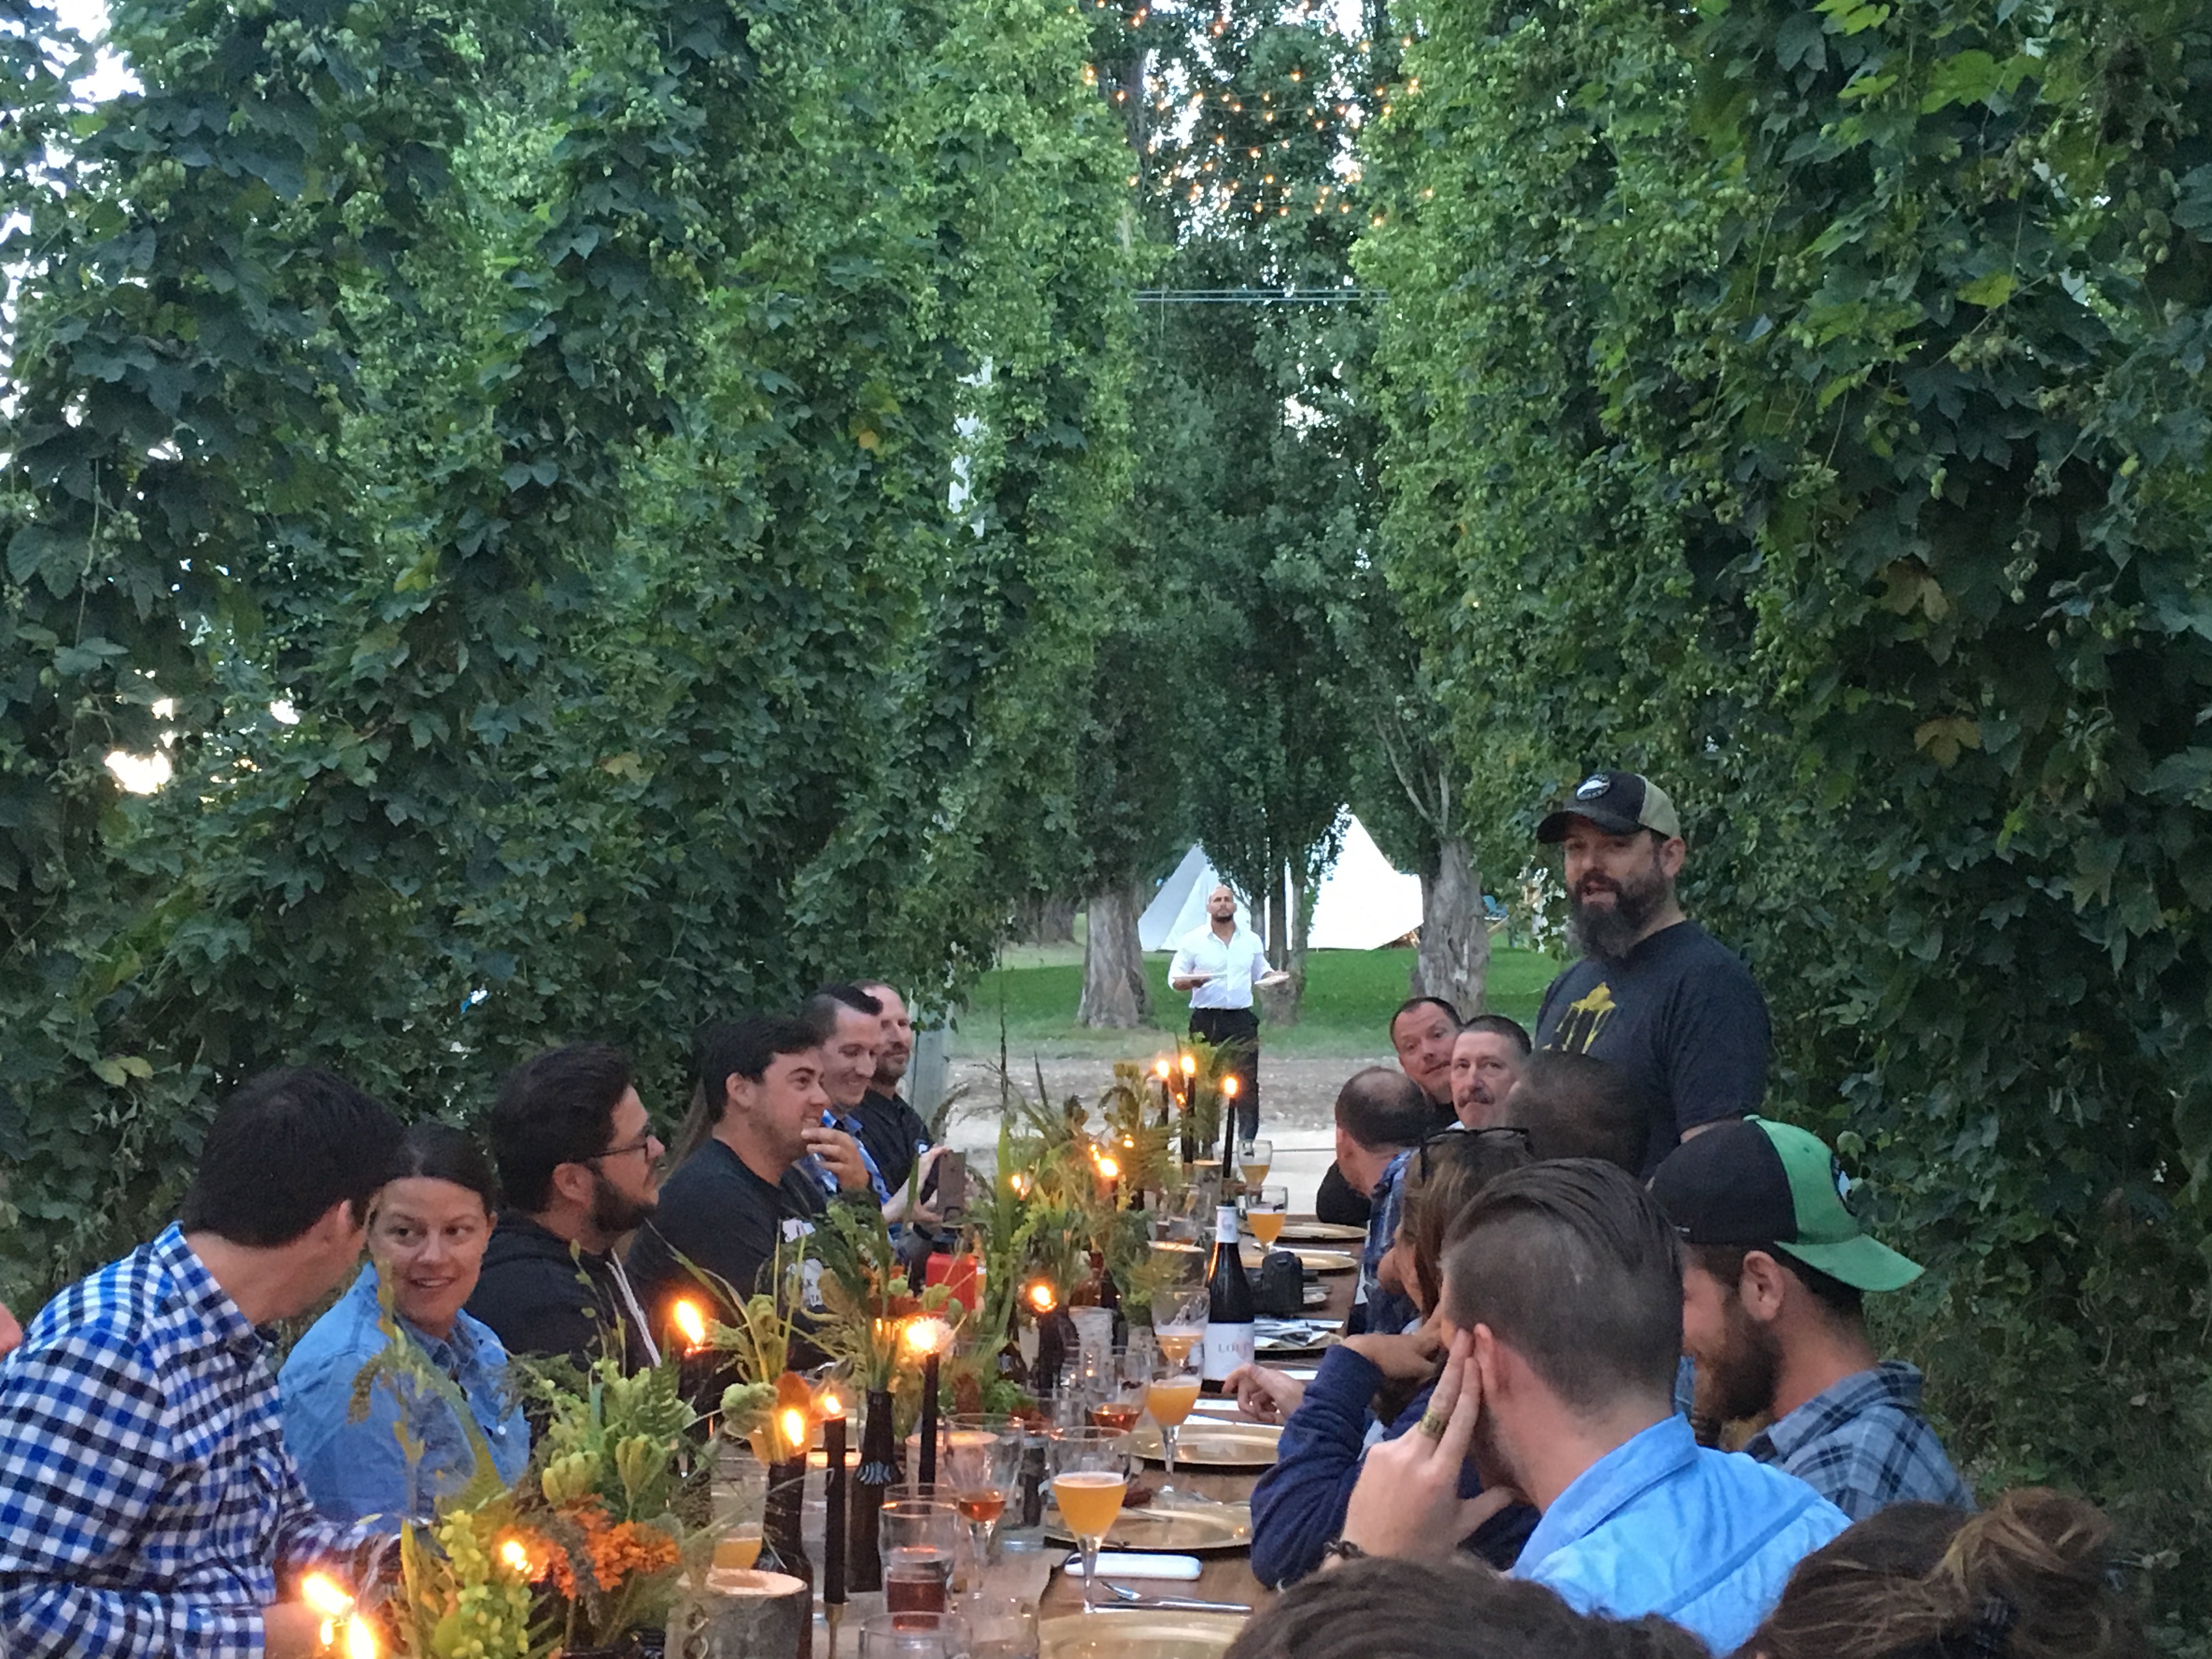 Goose Island brewer Keith Gabbett discussing the a beer while having dinner in the hop fields at Elk Mountain Farms.